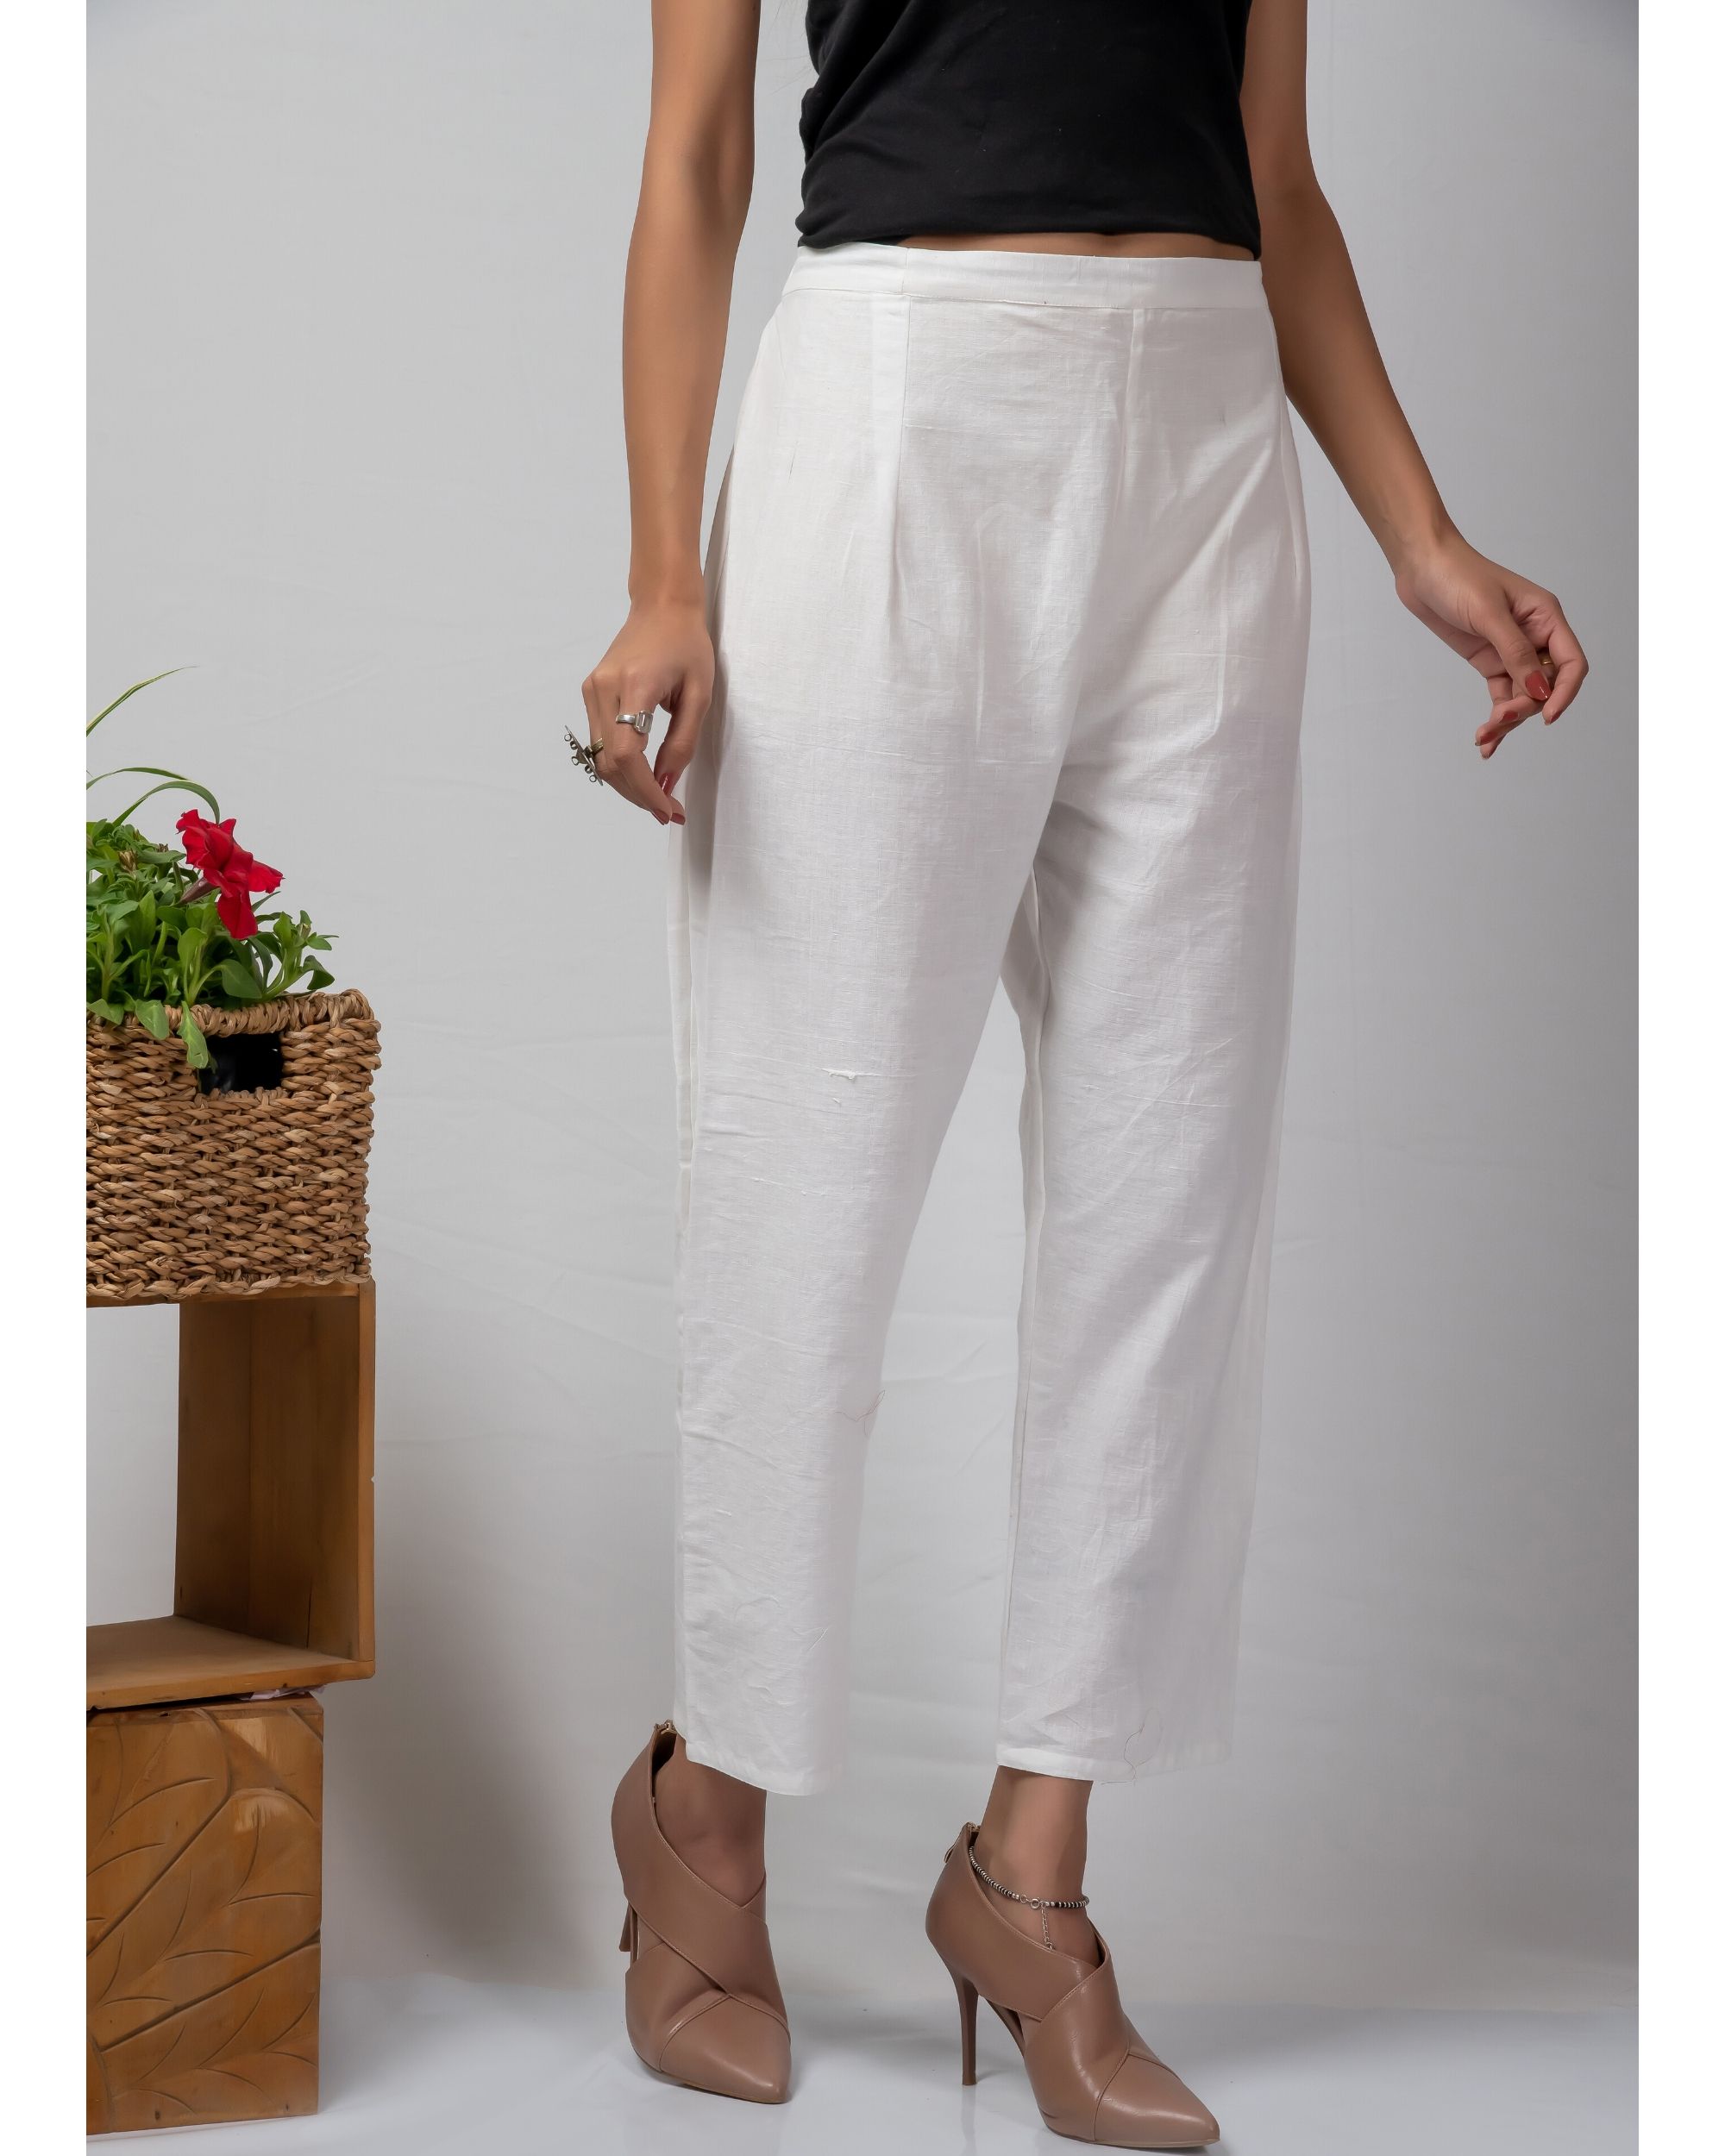 White straight cotton pants by Silai | The Secret Label